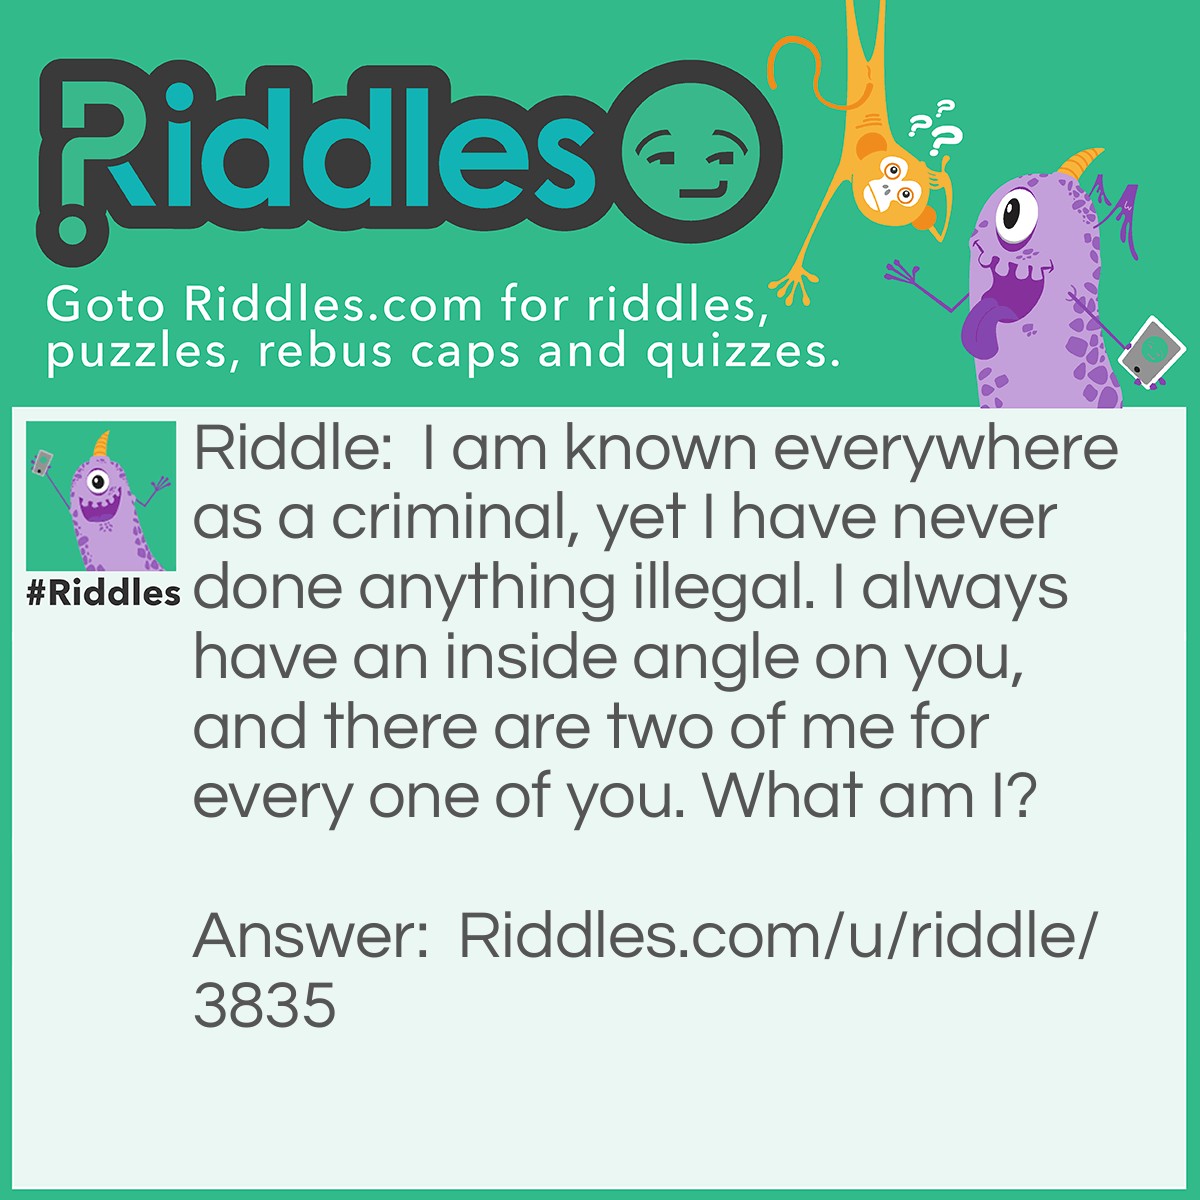 Riddle: I am known everywhere as a criminal, yet I have never done anything illegal. I always have an inside angle on you, and there are two of me for every one of you. What am I? Answer: I am... the crook of an elbow! The crook is called a crook (obviously), and as your arms are on the side of your body, the insides of your elbows most nearly always have an inside angle on you; it's not psychological at all! And for every arm is an elbow, so two elbows means two crooks of an elbow per person.